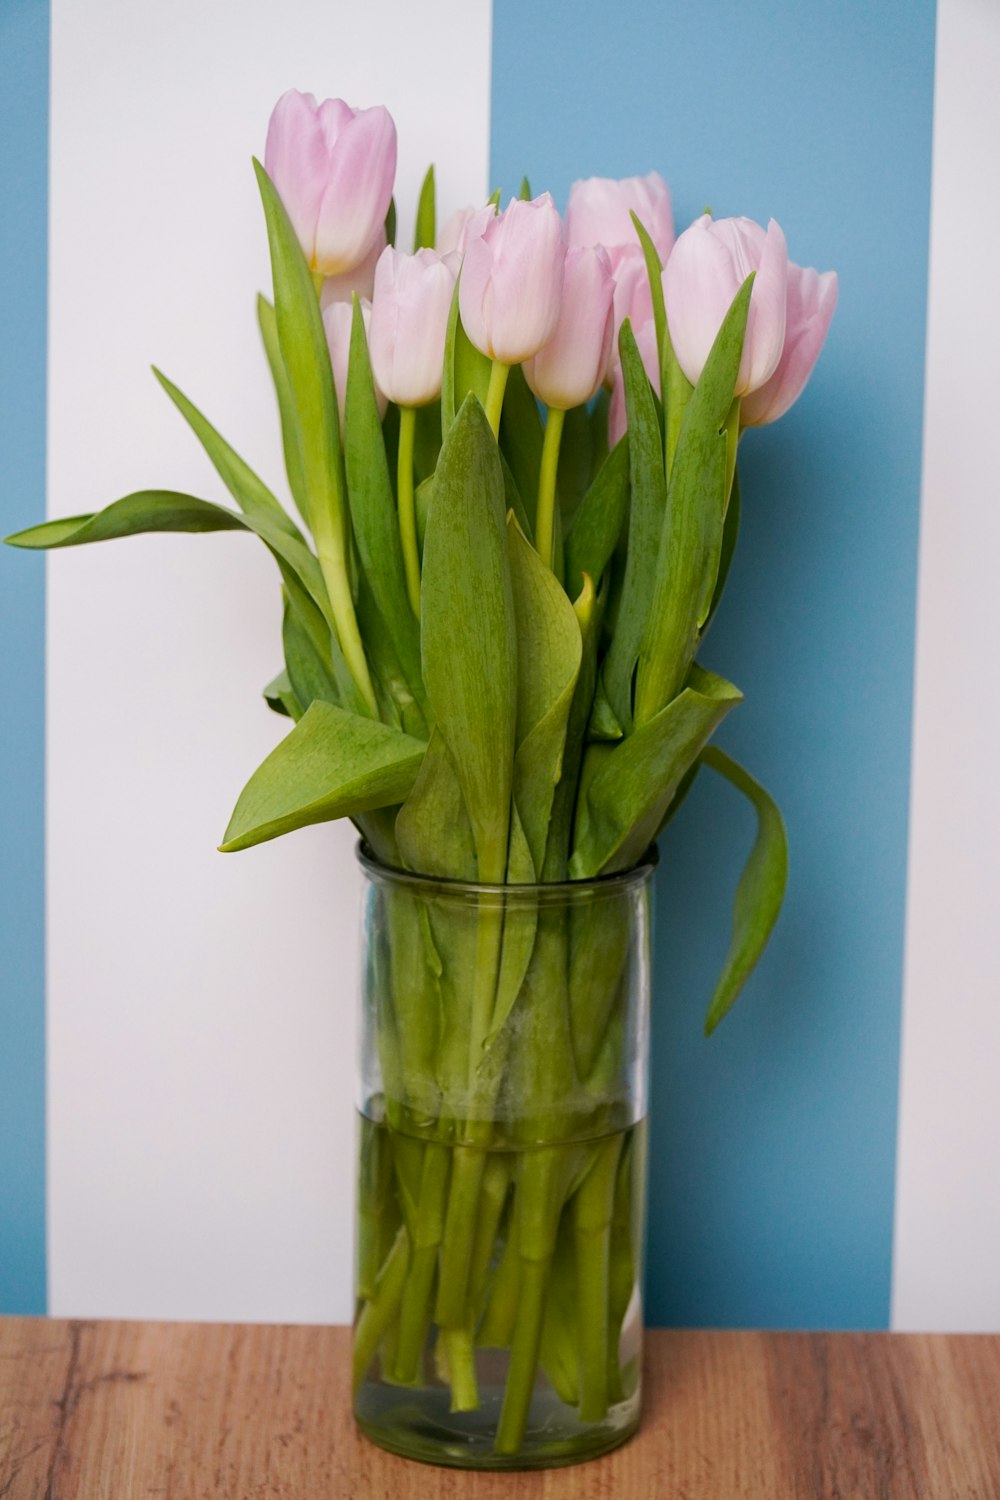 a glass vase filled with pink tulips on a table